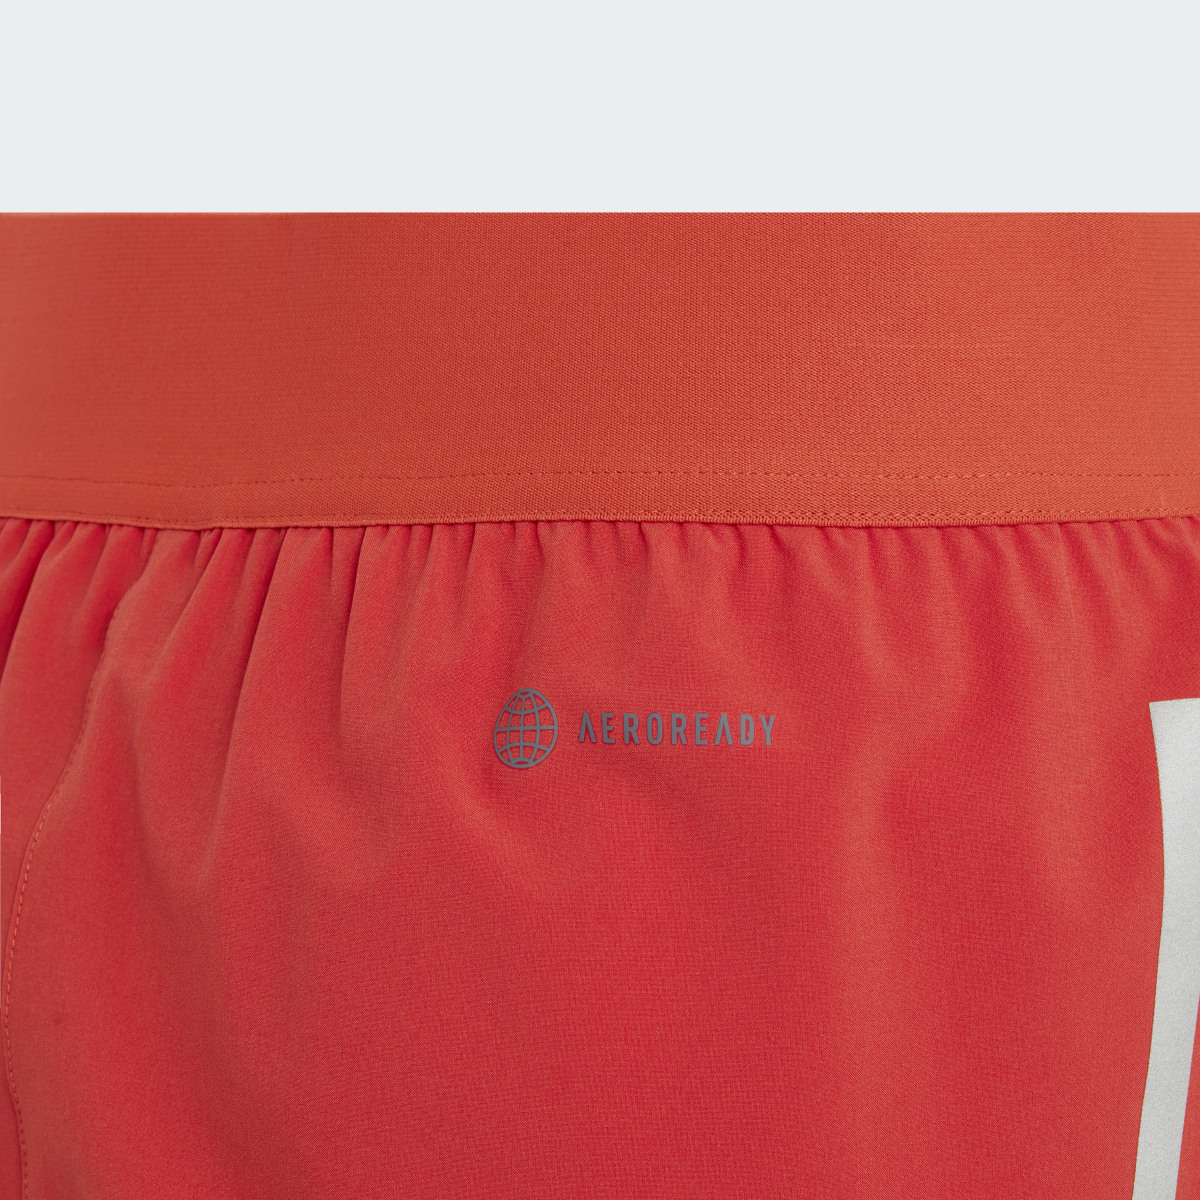 Adidas Two-In-One AEROREADY Woven Shorts. 4